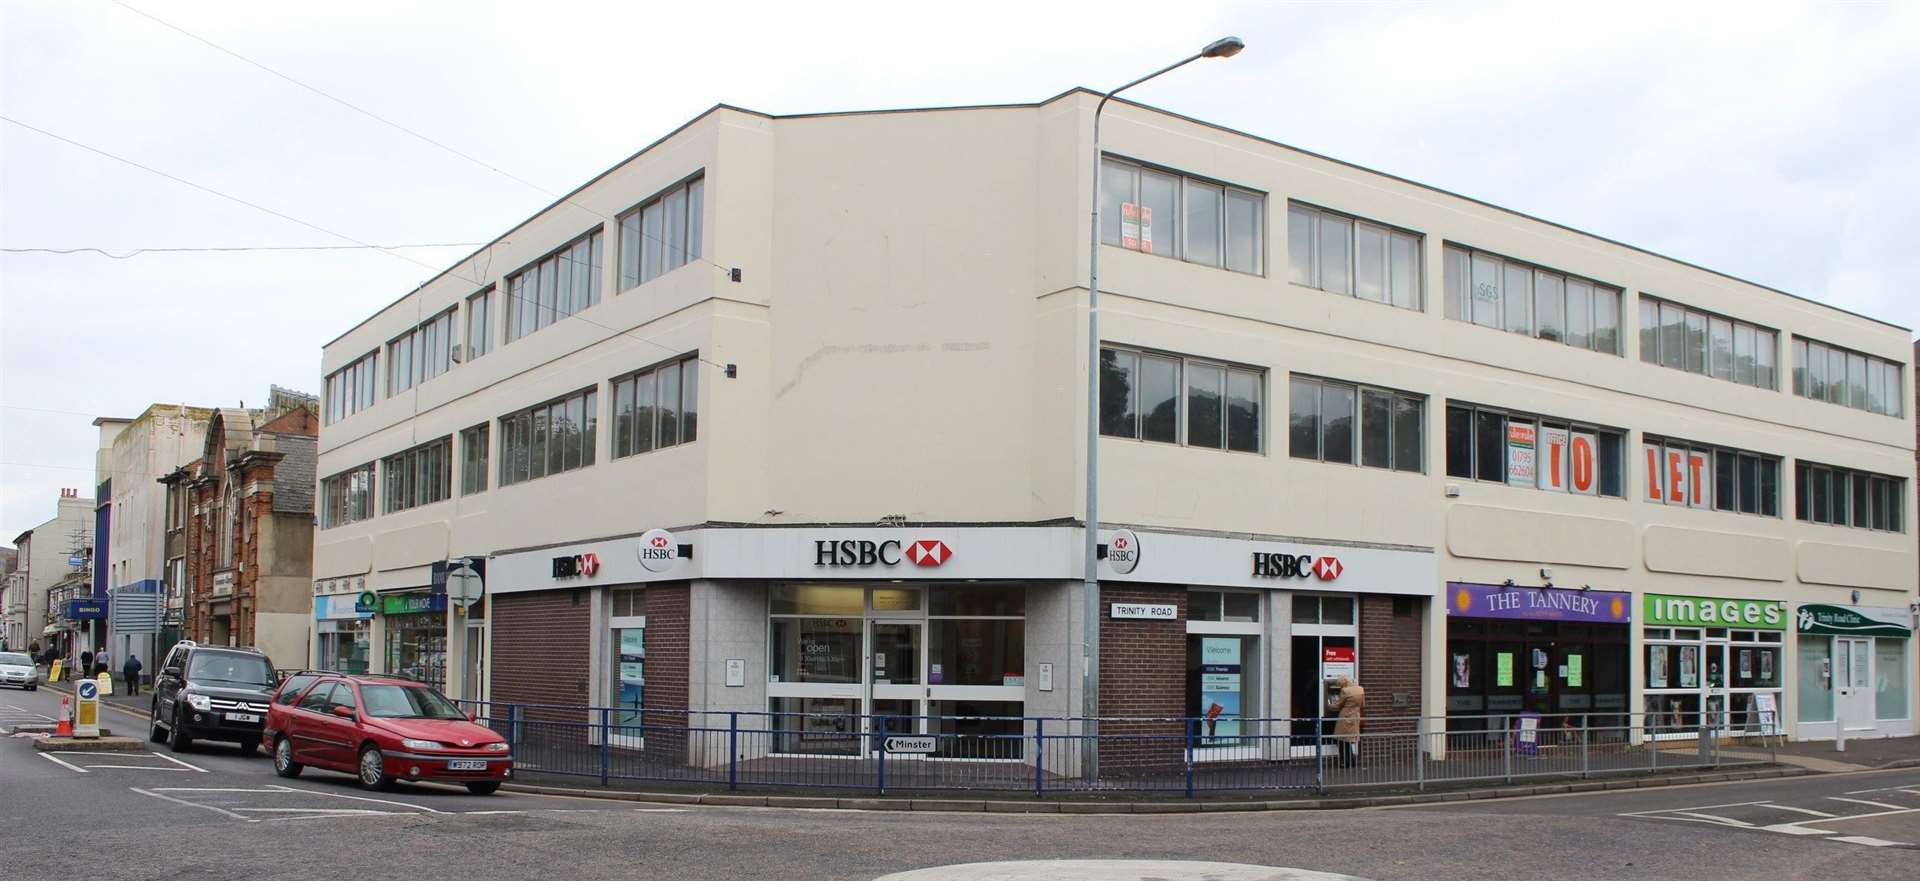 HSBC Bank Sheerness before it closed